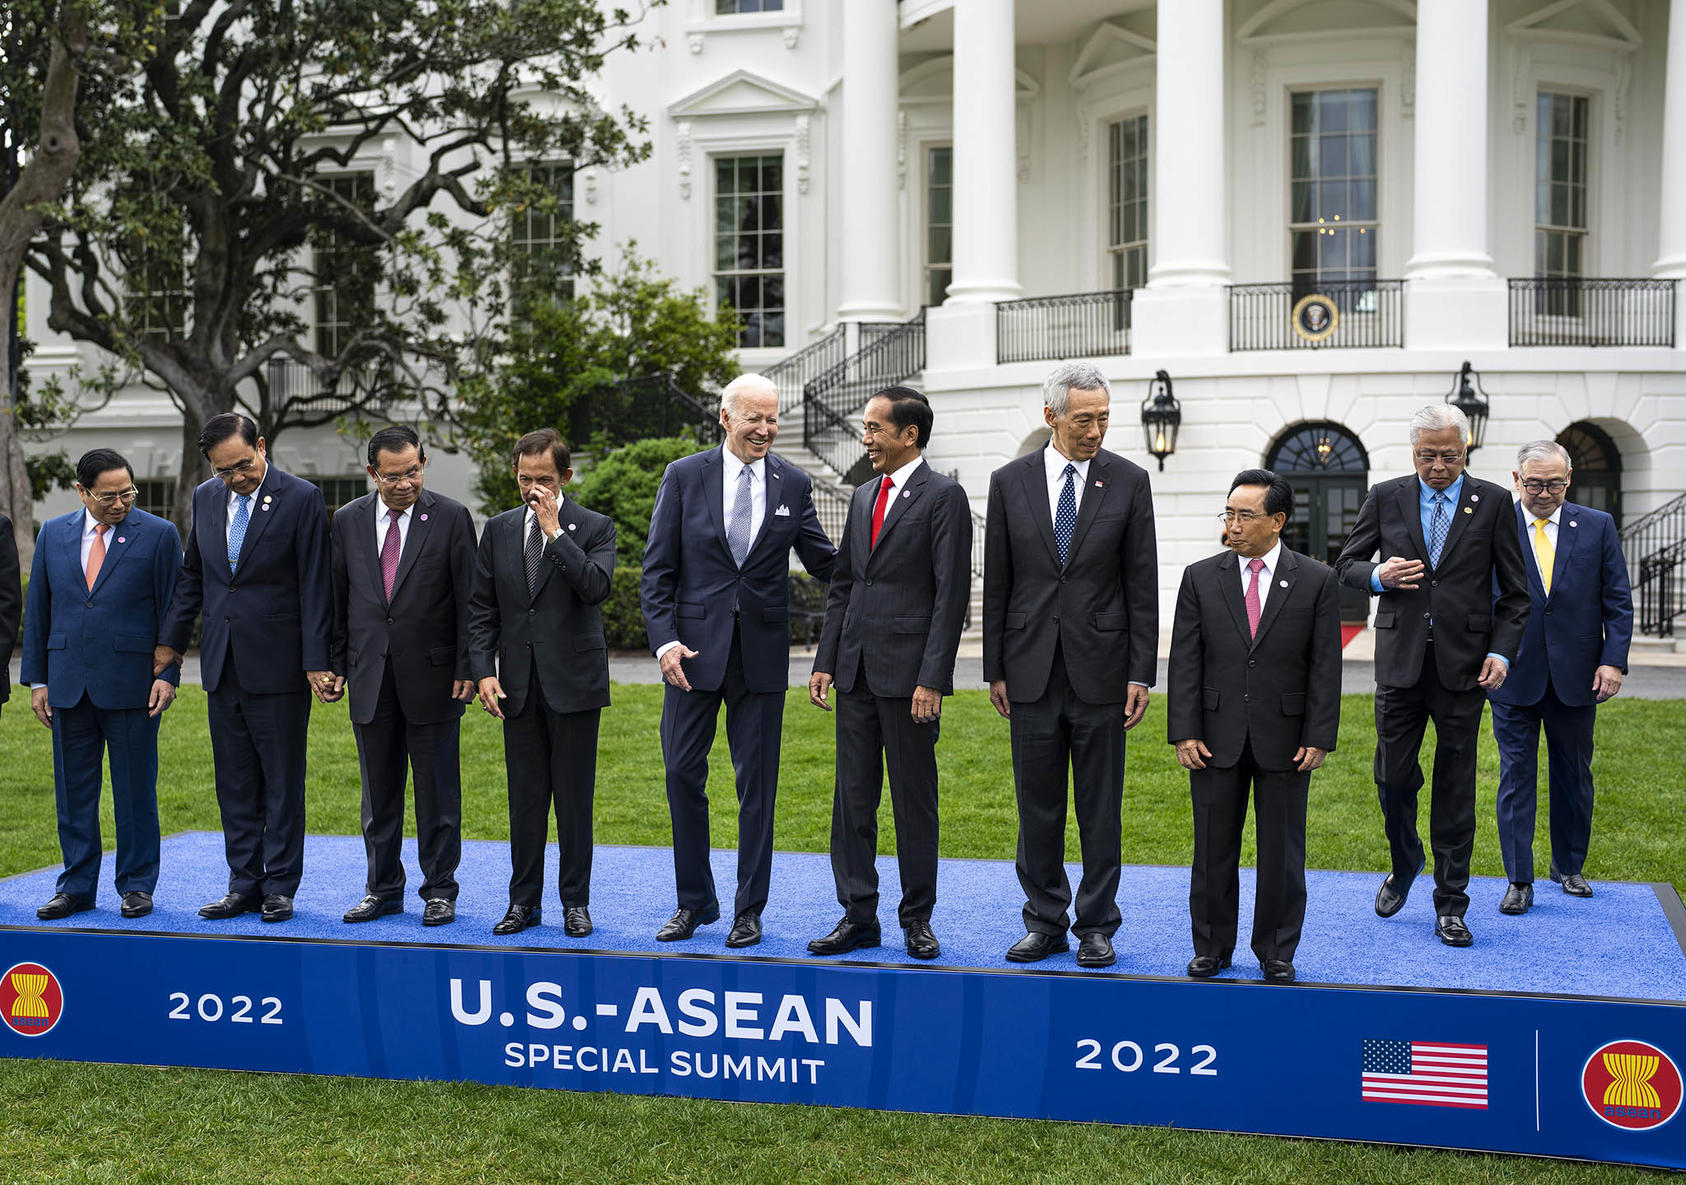 Leaders of Southeast Asian nations at the U.S-ASEAN special summit at the White House in Washington, May 12, 2022. Regional institutions like ASEAN are play a vital role in how states respond to conflict and crisis. (Doug Mills/The New York Times)